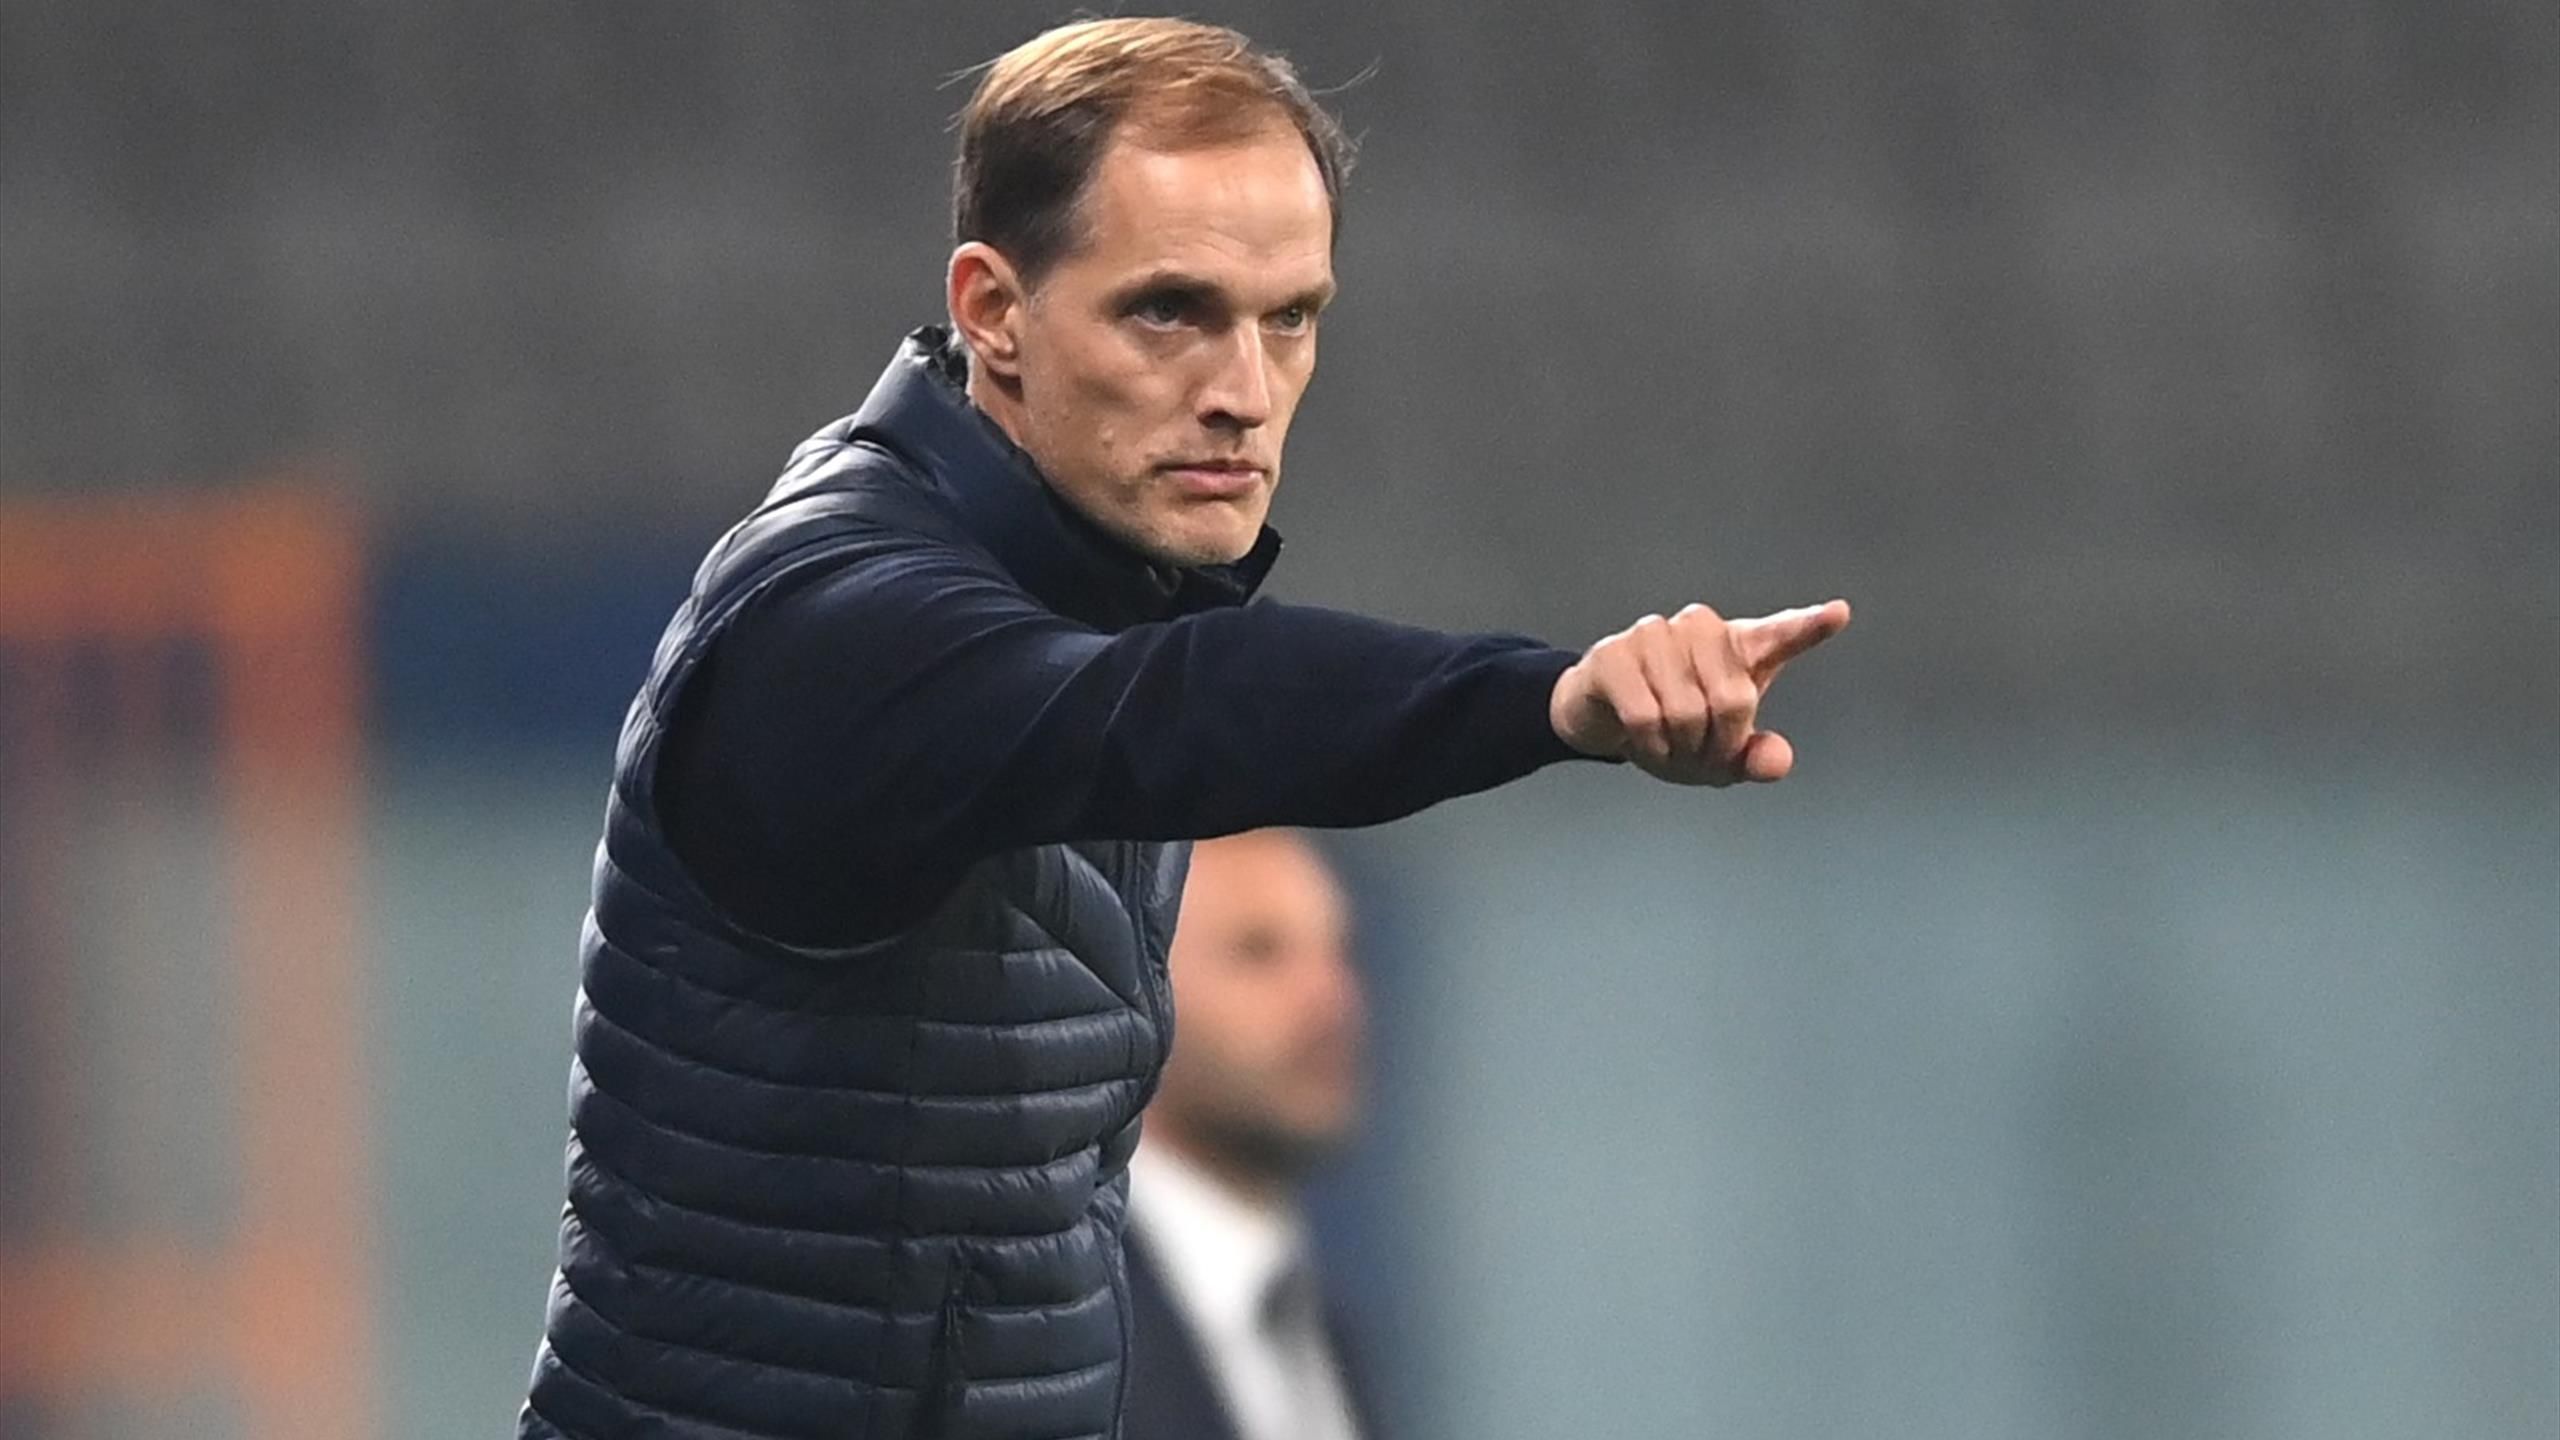 Thomas Tuchel is to take over as Chelsea boss from Frank Lampard